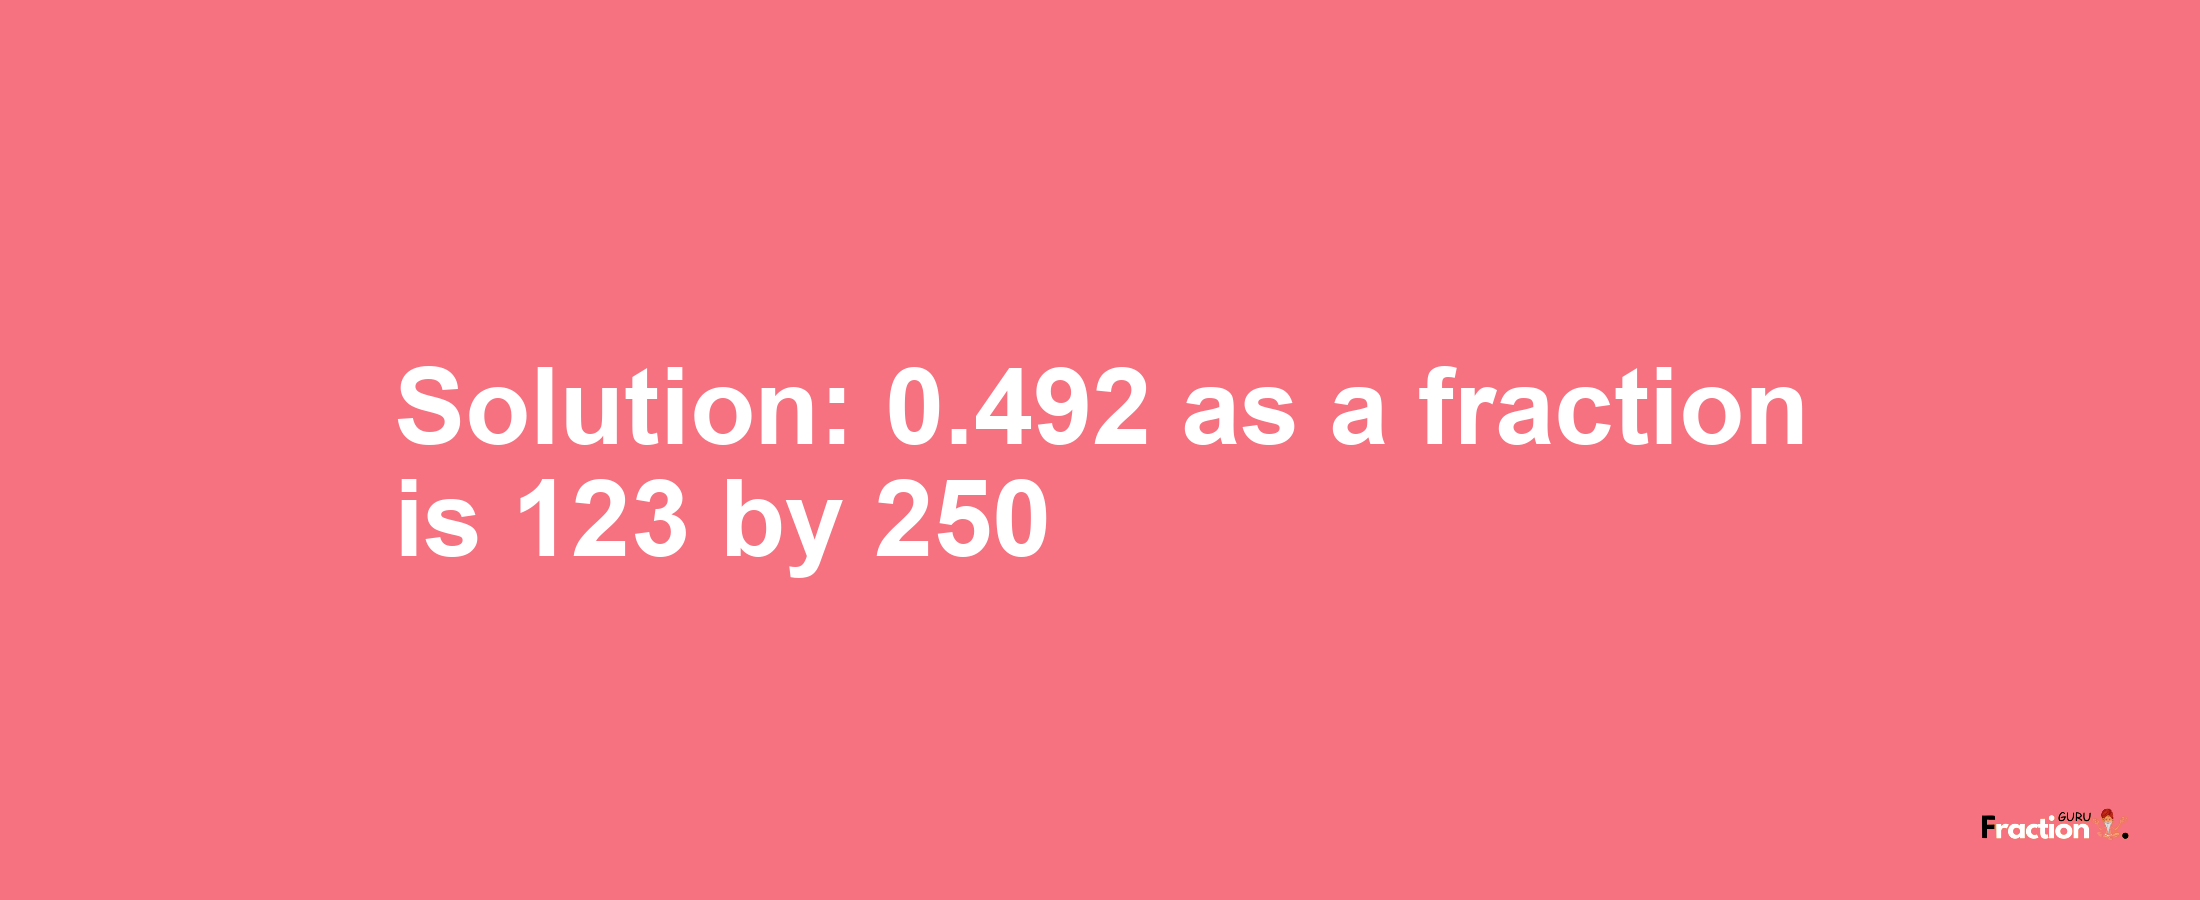 Solution:0.492 as a fraction is 123/250